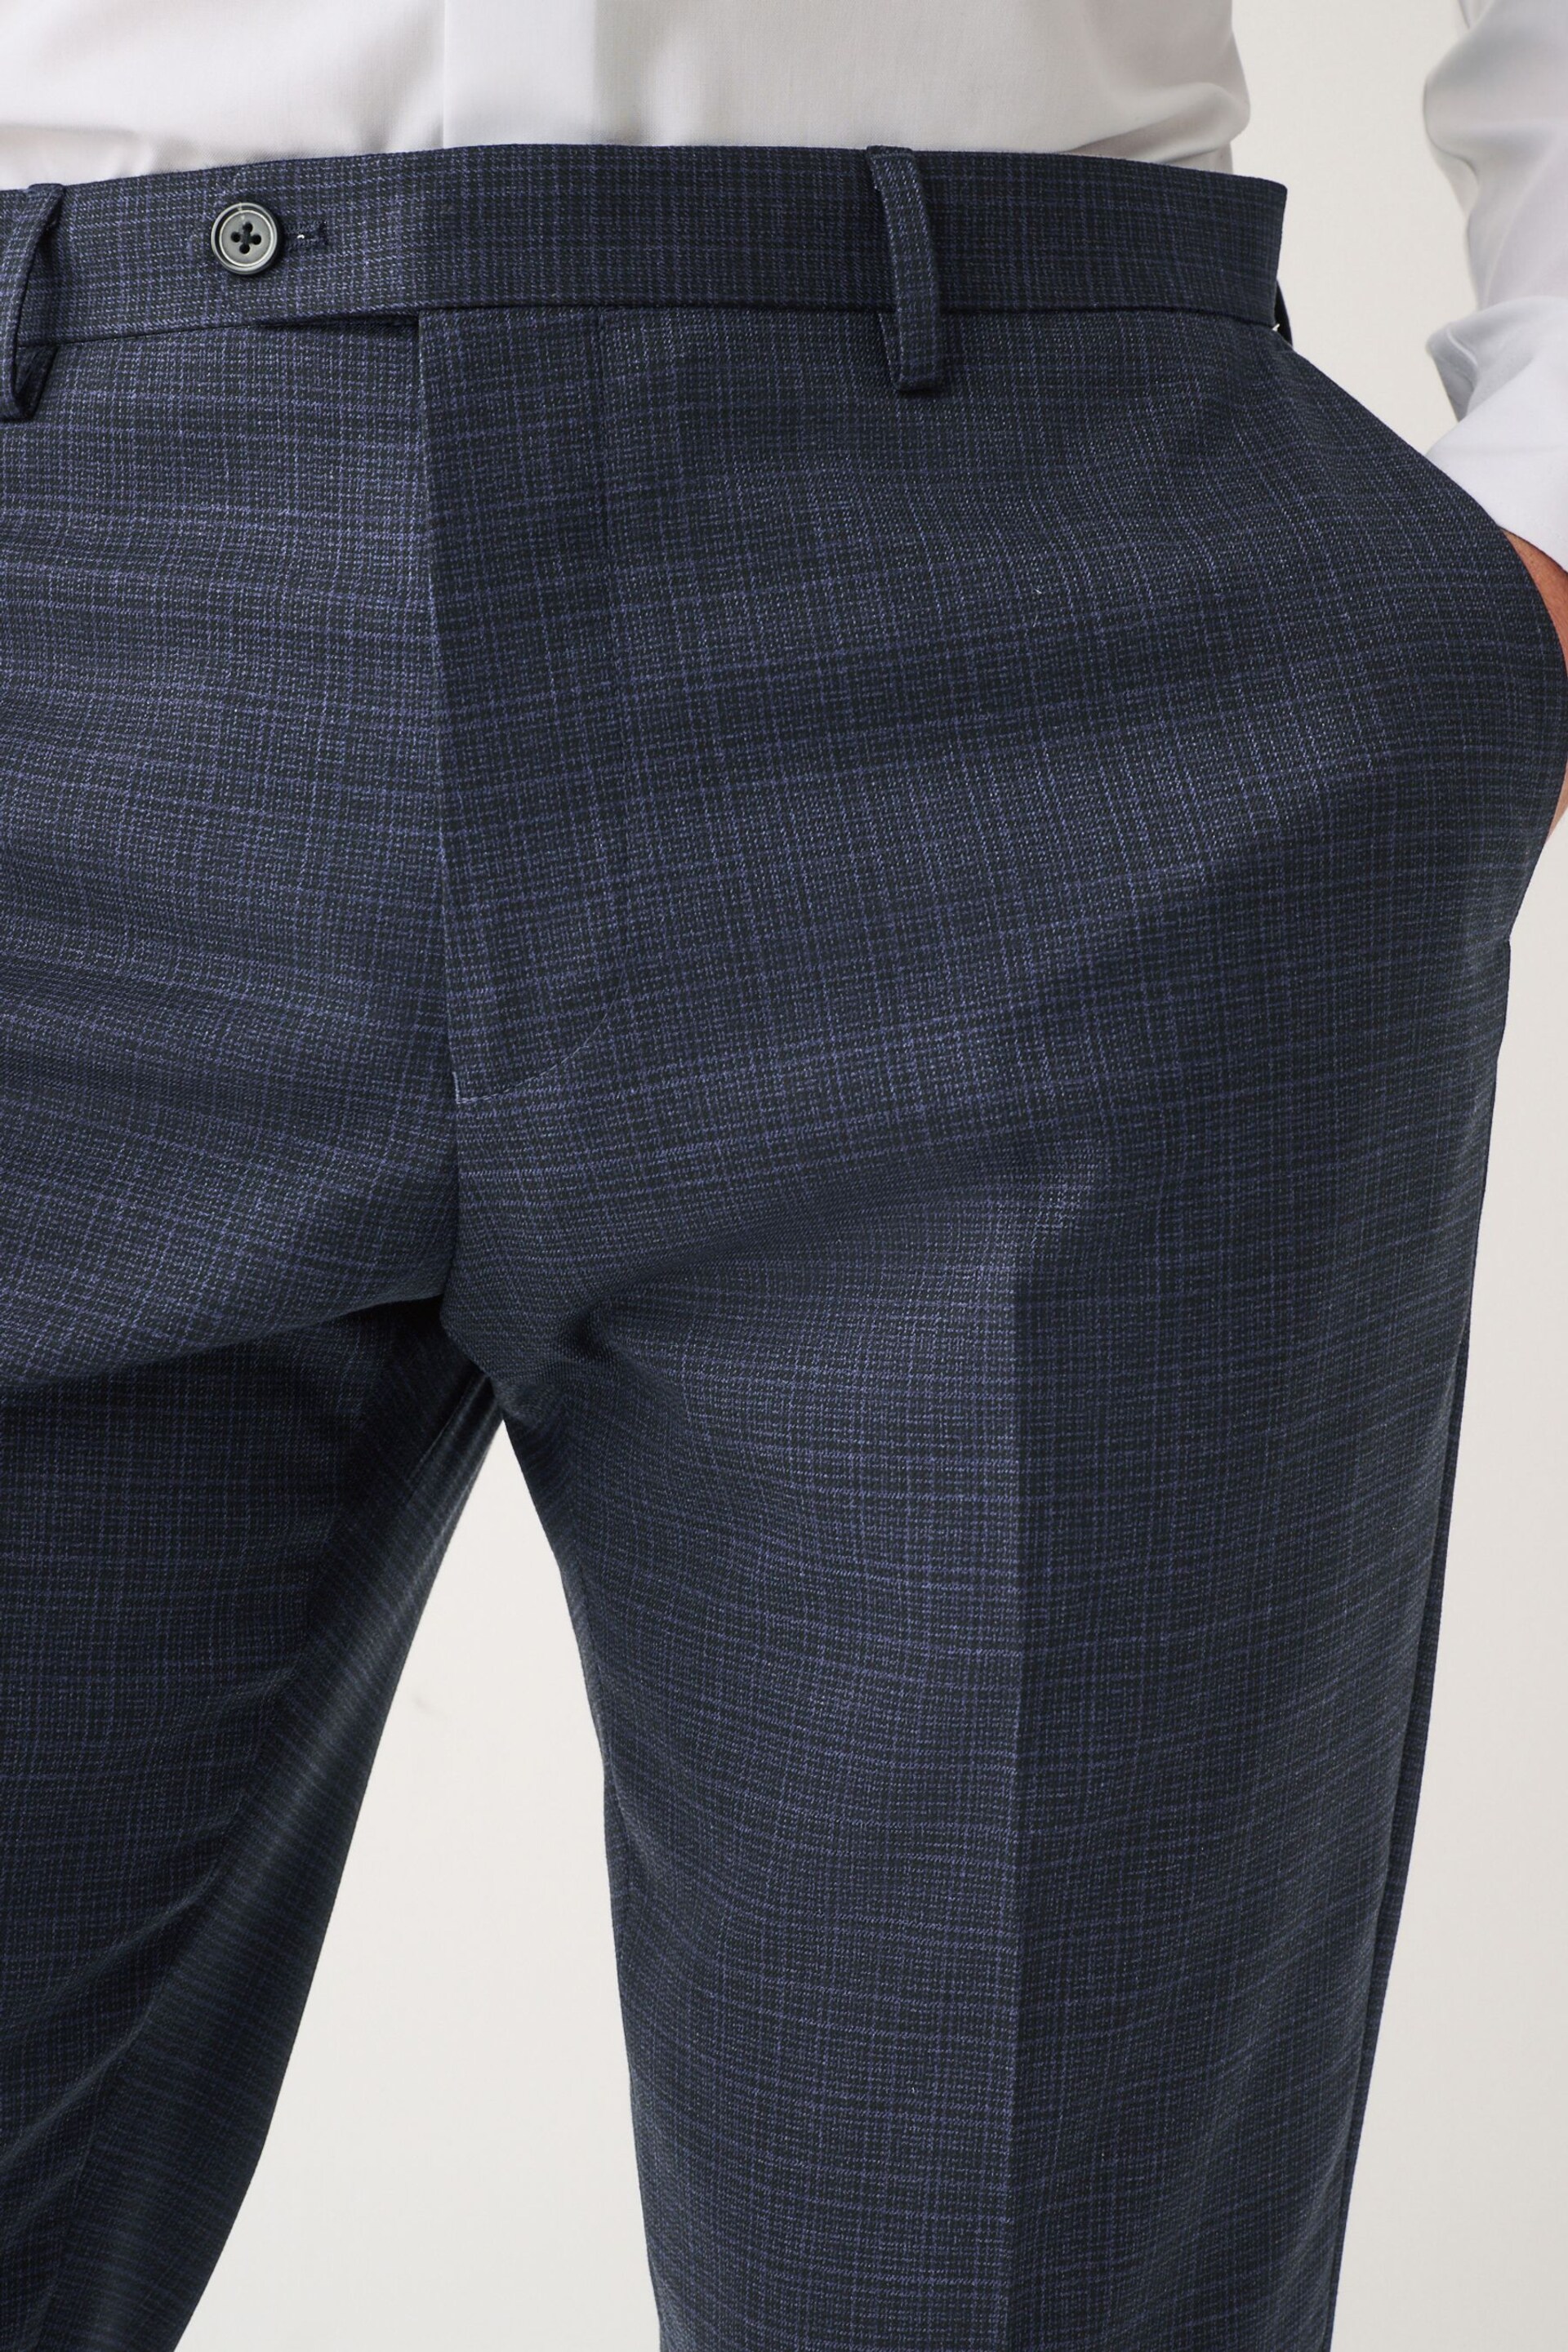 Navy Blue Skinny Check Suit Trousers - Image 6 of 10